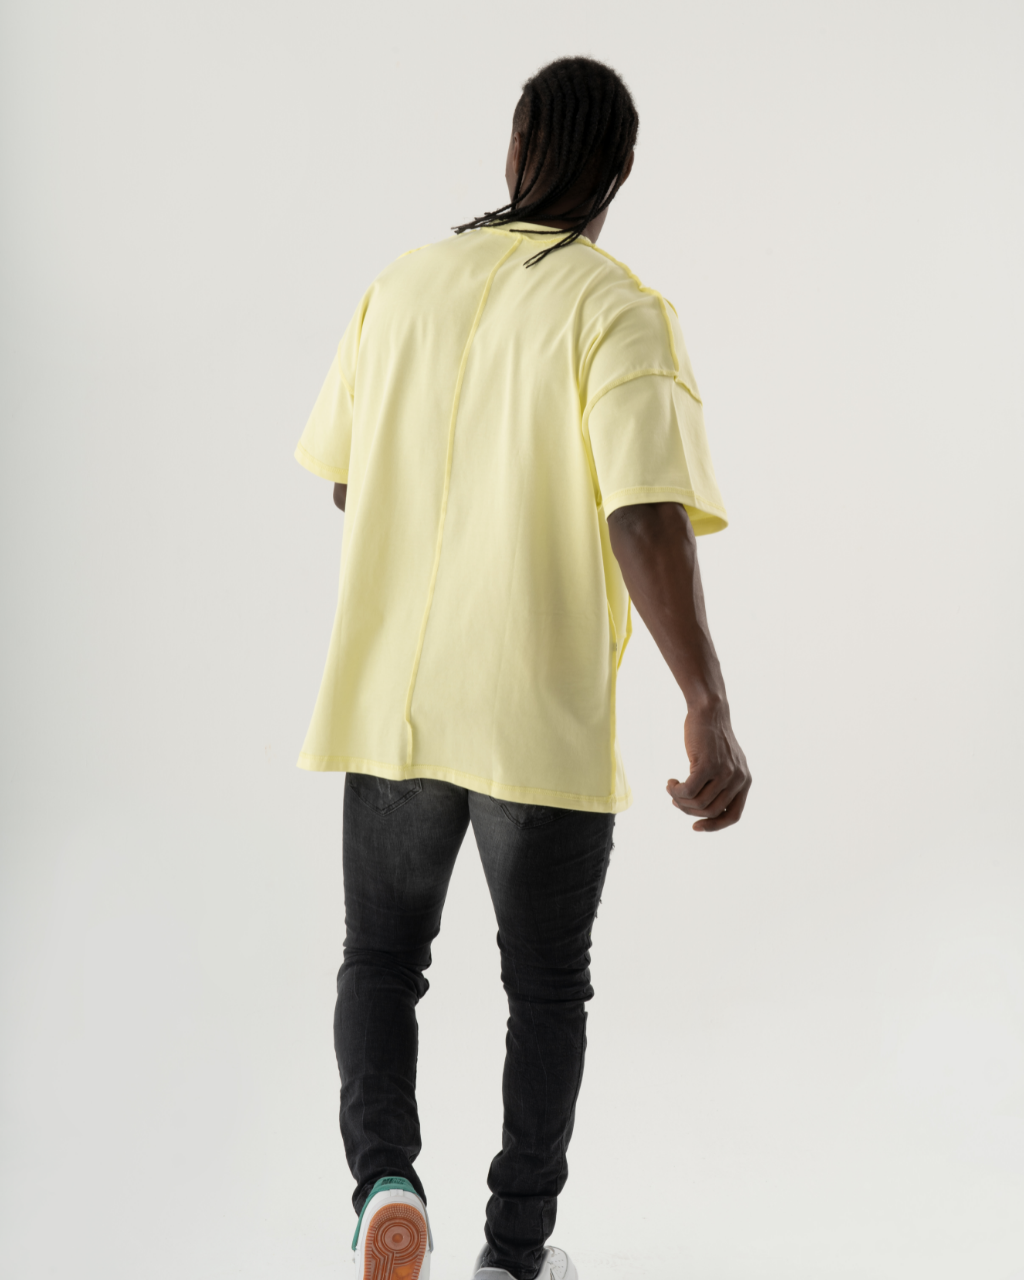 A casual man wearing a summery yellow MENTALIST T-SHIRT | LIME and black sneakers.